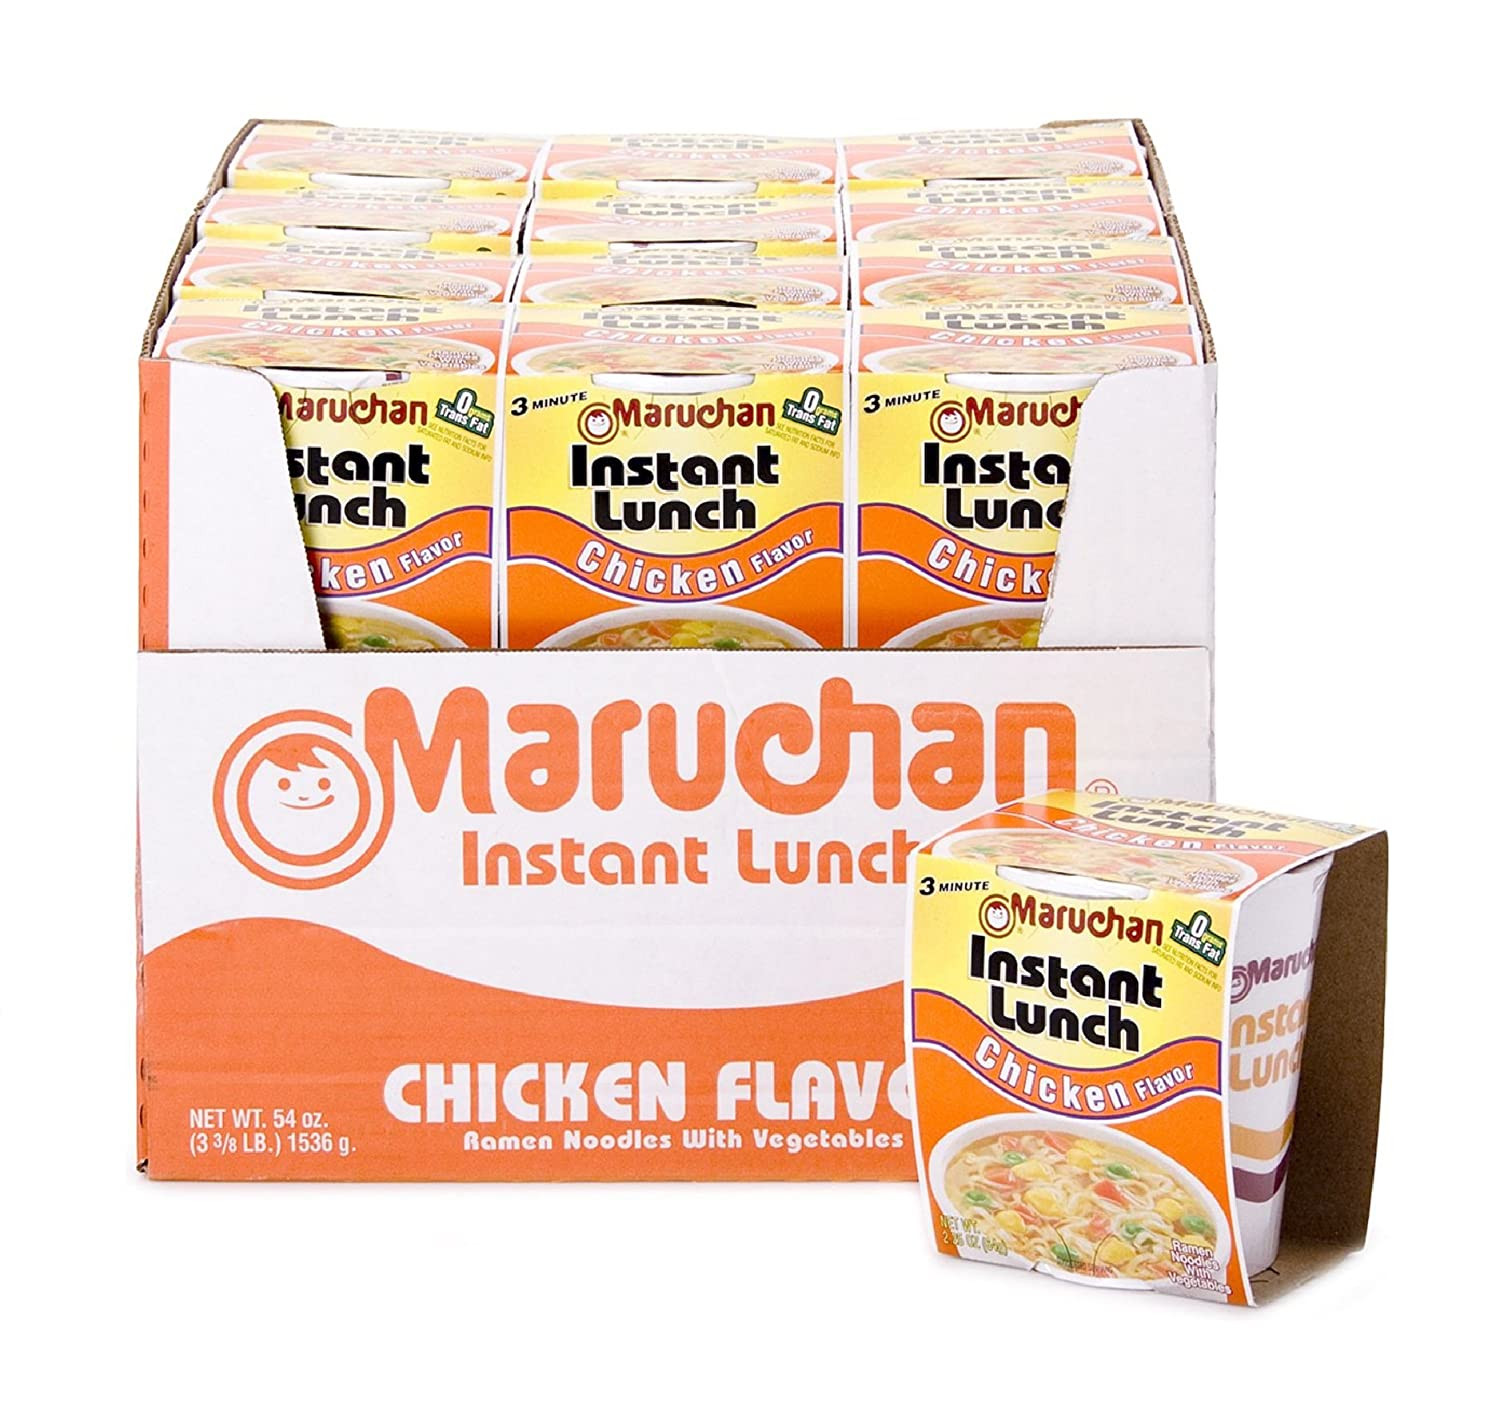 Maruchan Cup Noodles
 Maruchan Instant Lunch Chicken Flavored Cup Noodle 24